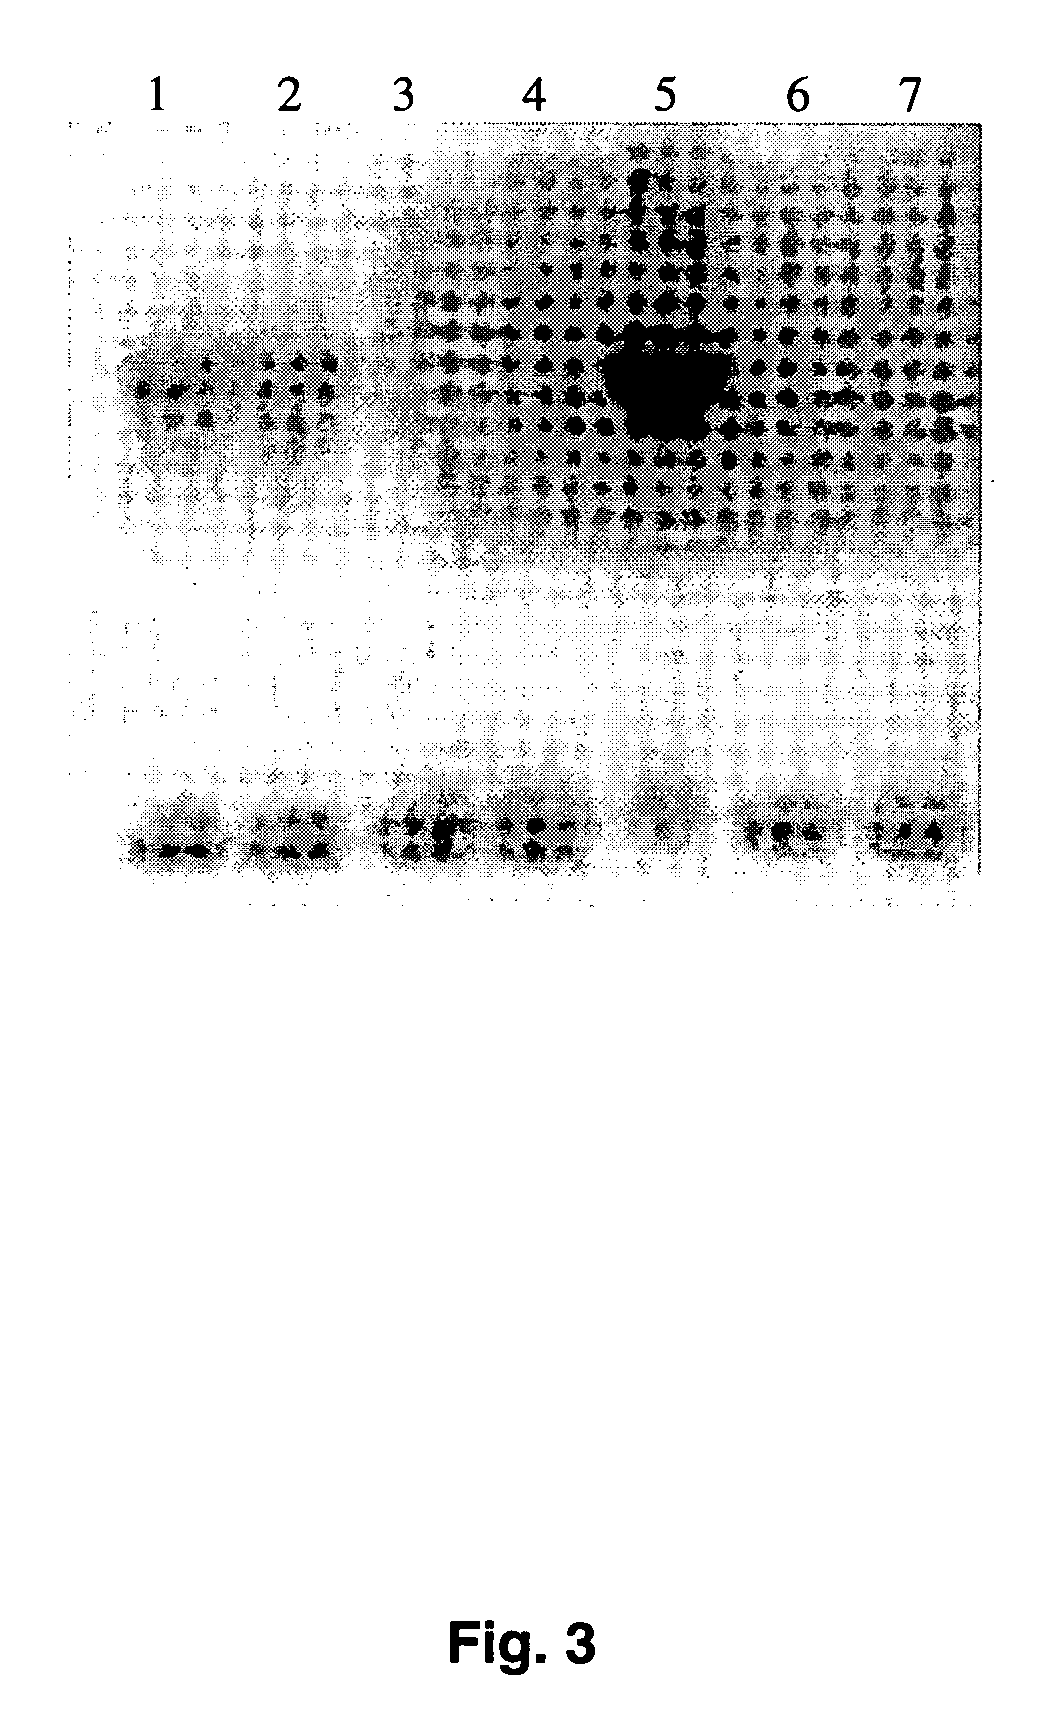 DNA immunocontraceptive vaccines and uses thereof